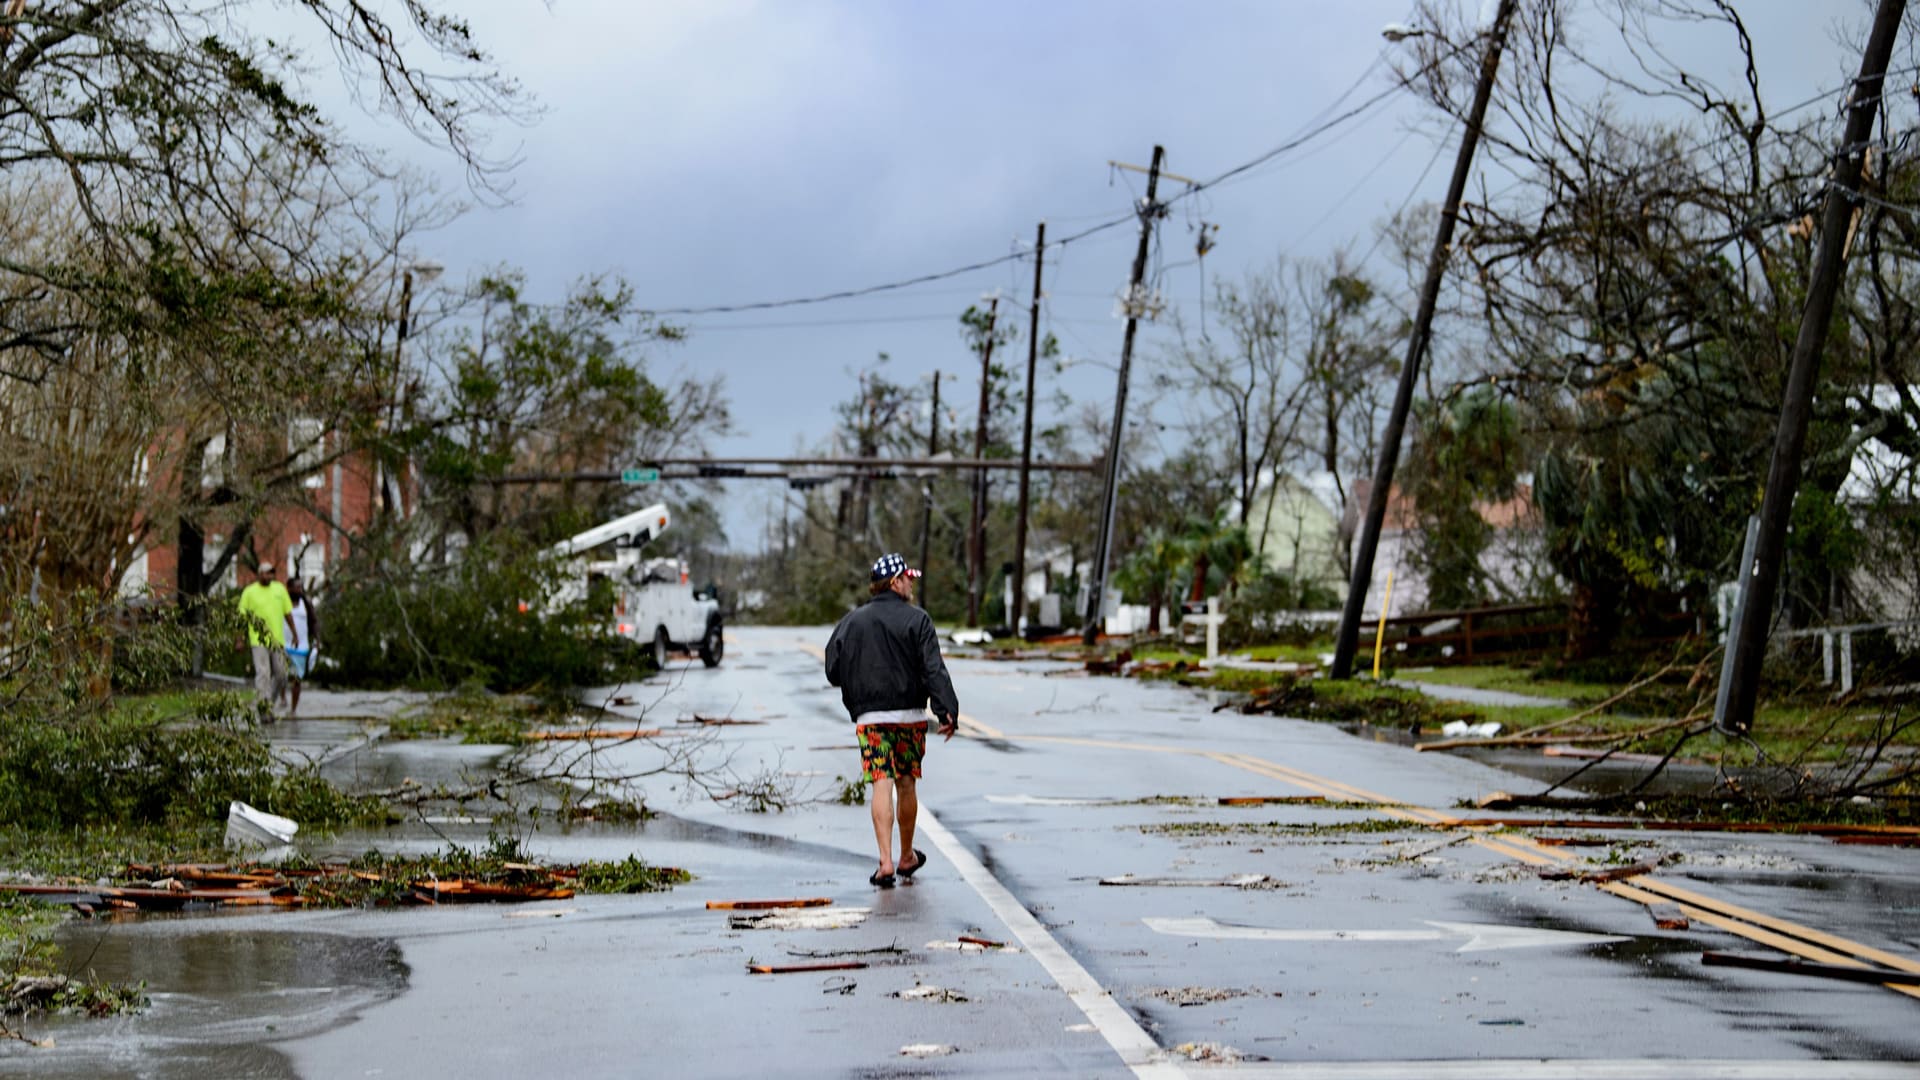 How to help Hurricane Michael victims: 15 things you can do right now